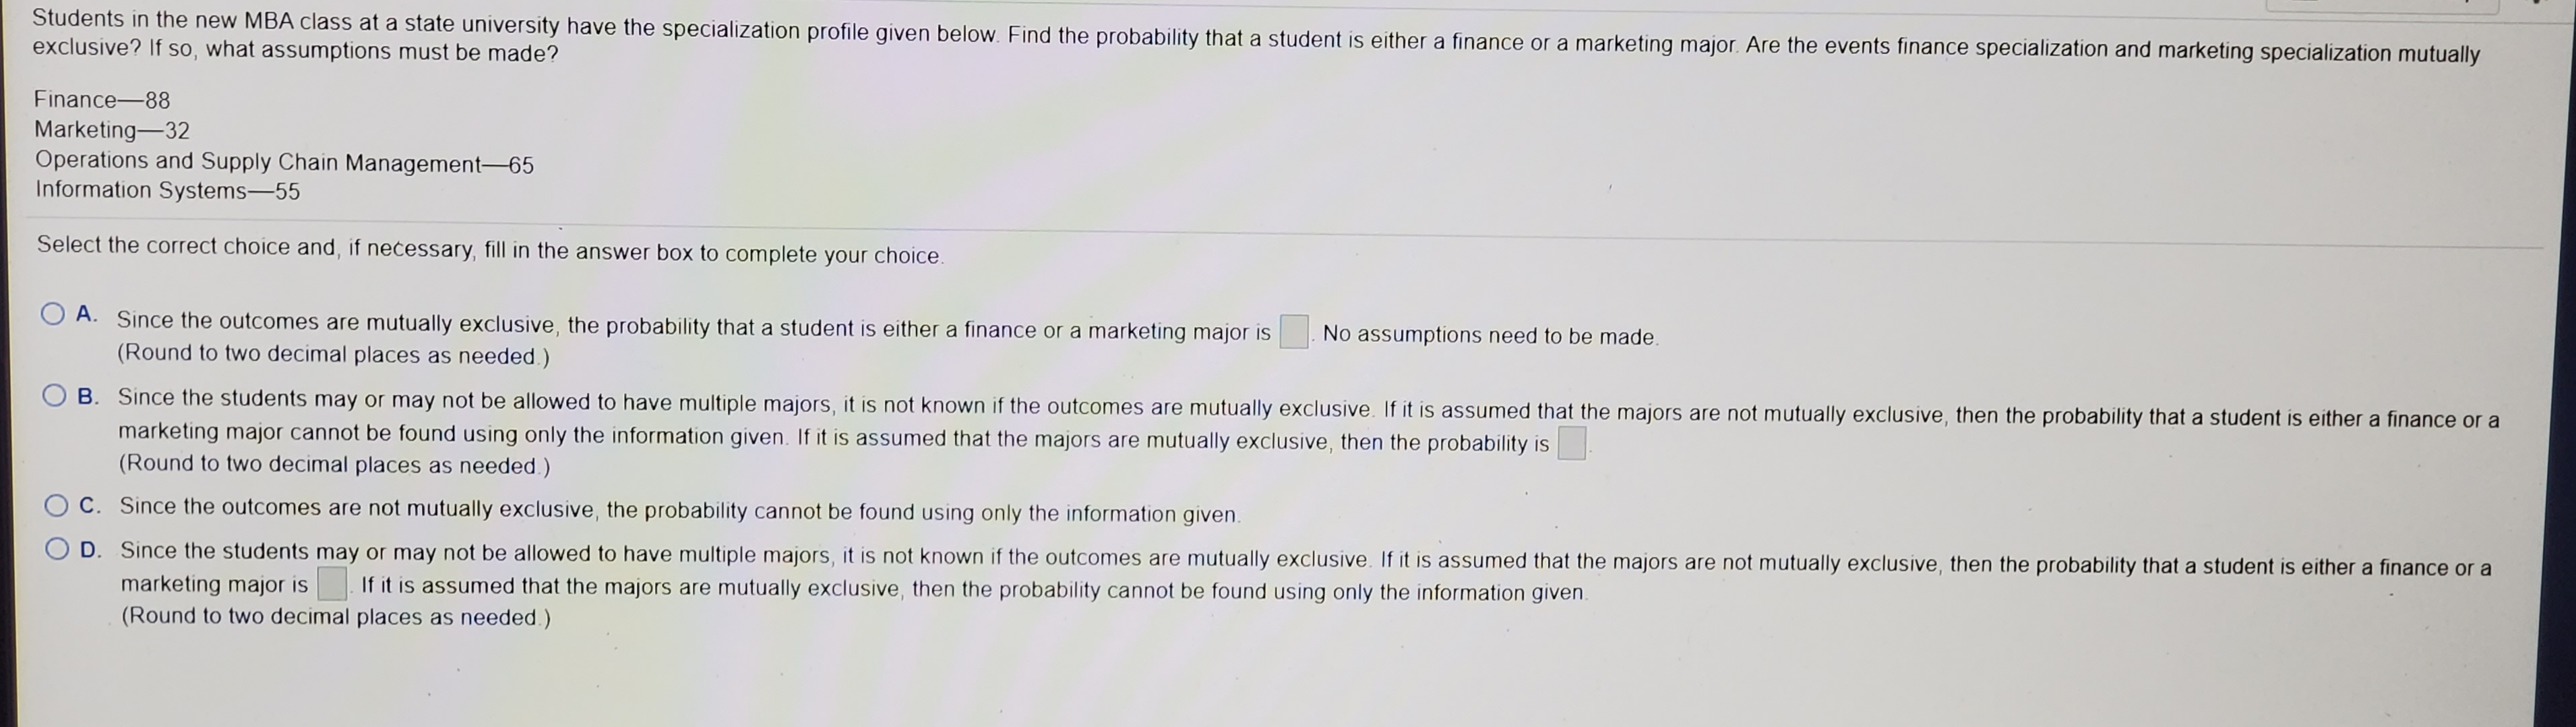 mutually
Finance-88
Marketing-32
Operations and Supply Chain Management-65
Information Systems-55
Select the correct choice and, if necessary, fill in the answer box to complete your choice.
O A. Since the outcomes are mutually exclusive, the probability that a student is either a finance or a marketing major is
No assumptions need to be made.
(Round to two decimal places as needed.)
B. Since the students may or may not be allowed to have multiple majors, it is not known if the outcomes are mutually exclusive. If it is assumed that the majors are not mutually exclusive, then the probability that a student is either a finance or a
marketing major cannot be found using only the information given. If it is assumed that the majors are mutually exclusive, then the probability is
(Round to two decimal places as needed.)
O C. Since the outcomes are not mutually exclusive, the probability cannot be found using only the information given.
O D. Since the students may or may not be allowed to have multiple majors, it is not known if the outcomes are mutually exclusive. If it is assumed that the majors are not mutually exclusive, then the probability that a student is either a finance or a
marketing major is
If it is assumed that the majors are mutually exclusive, then the probability cannot be found using only the information given.
(Round to two decimal places as needed.)
